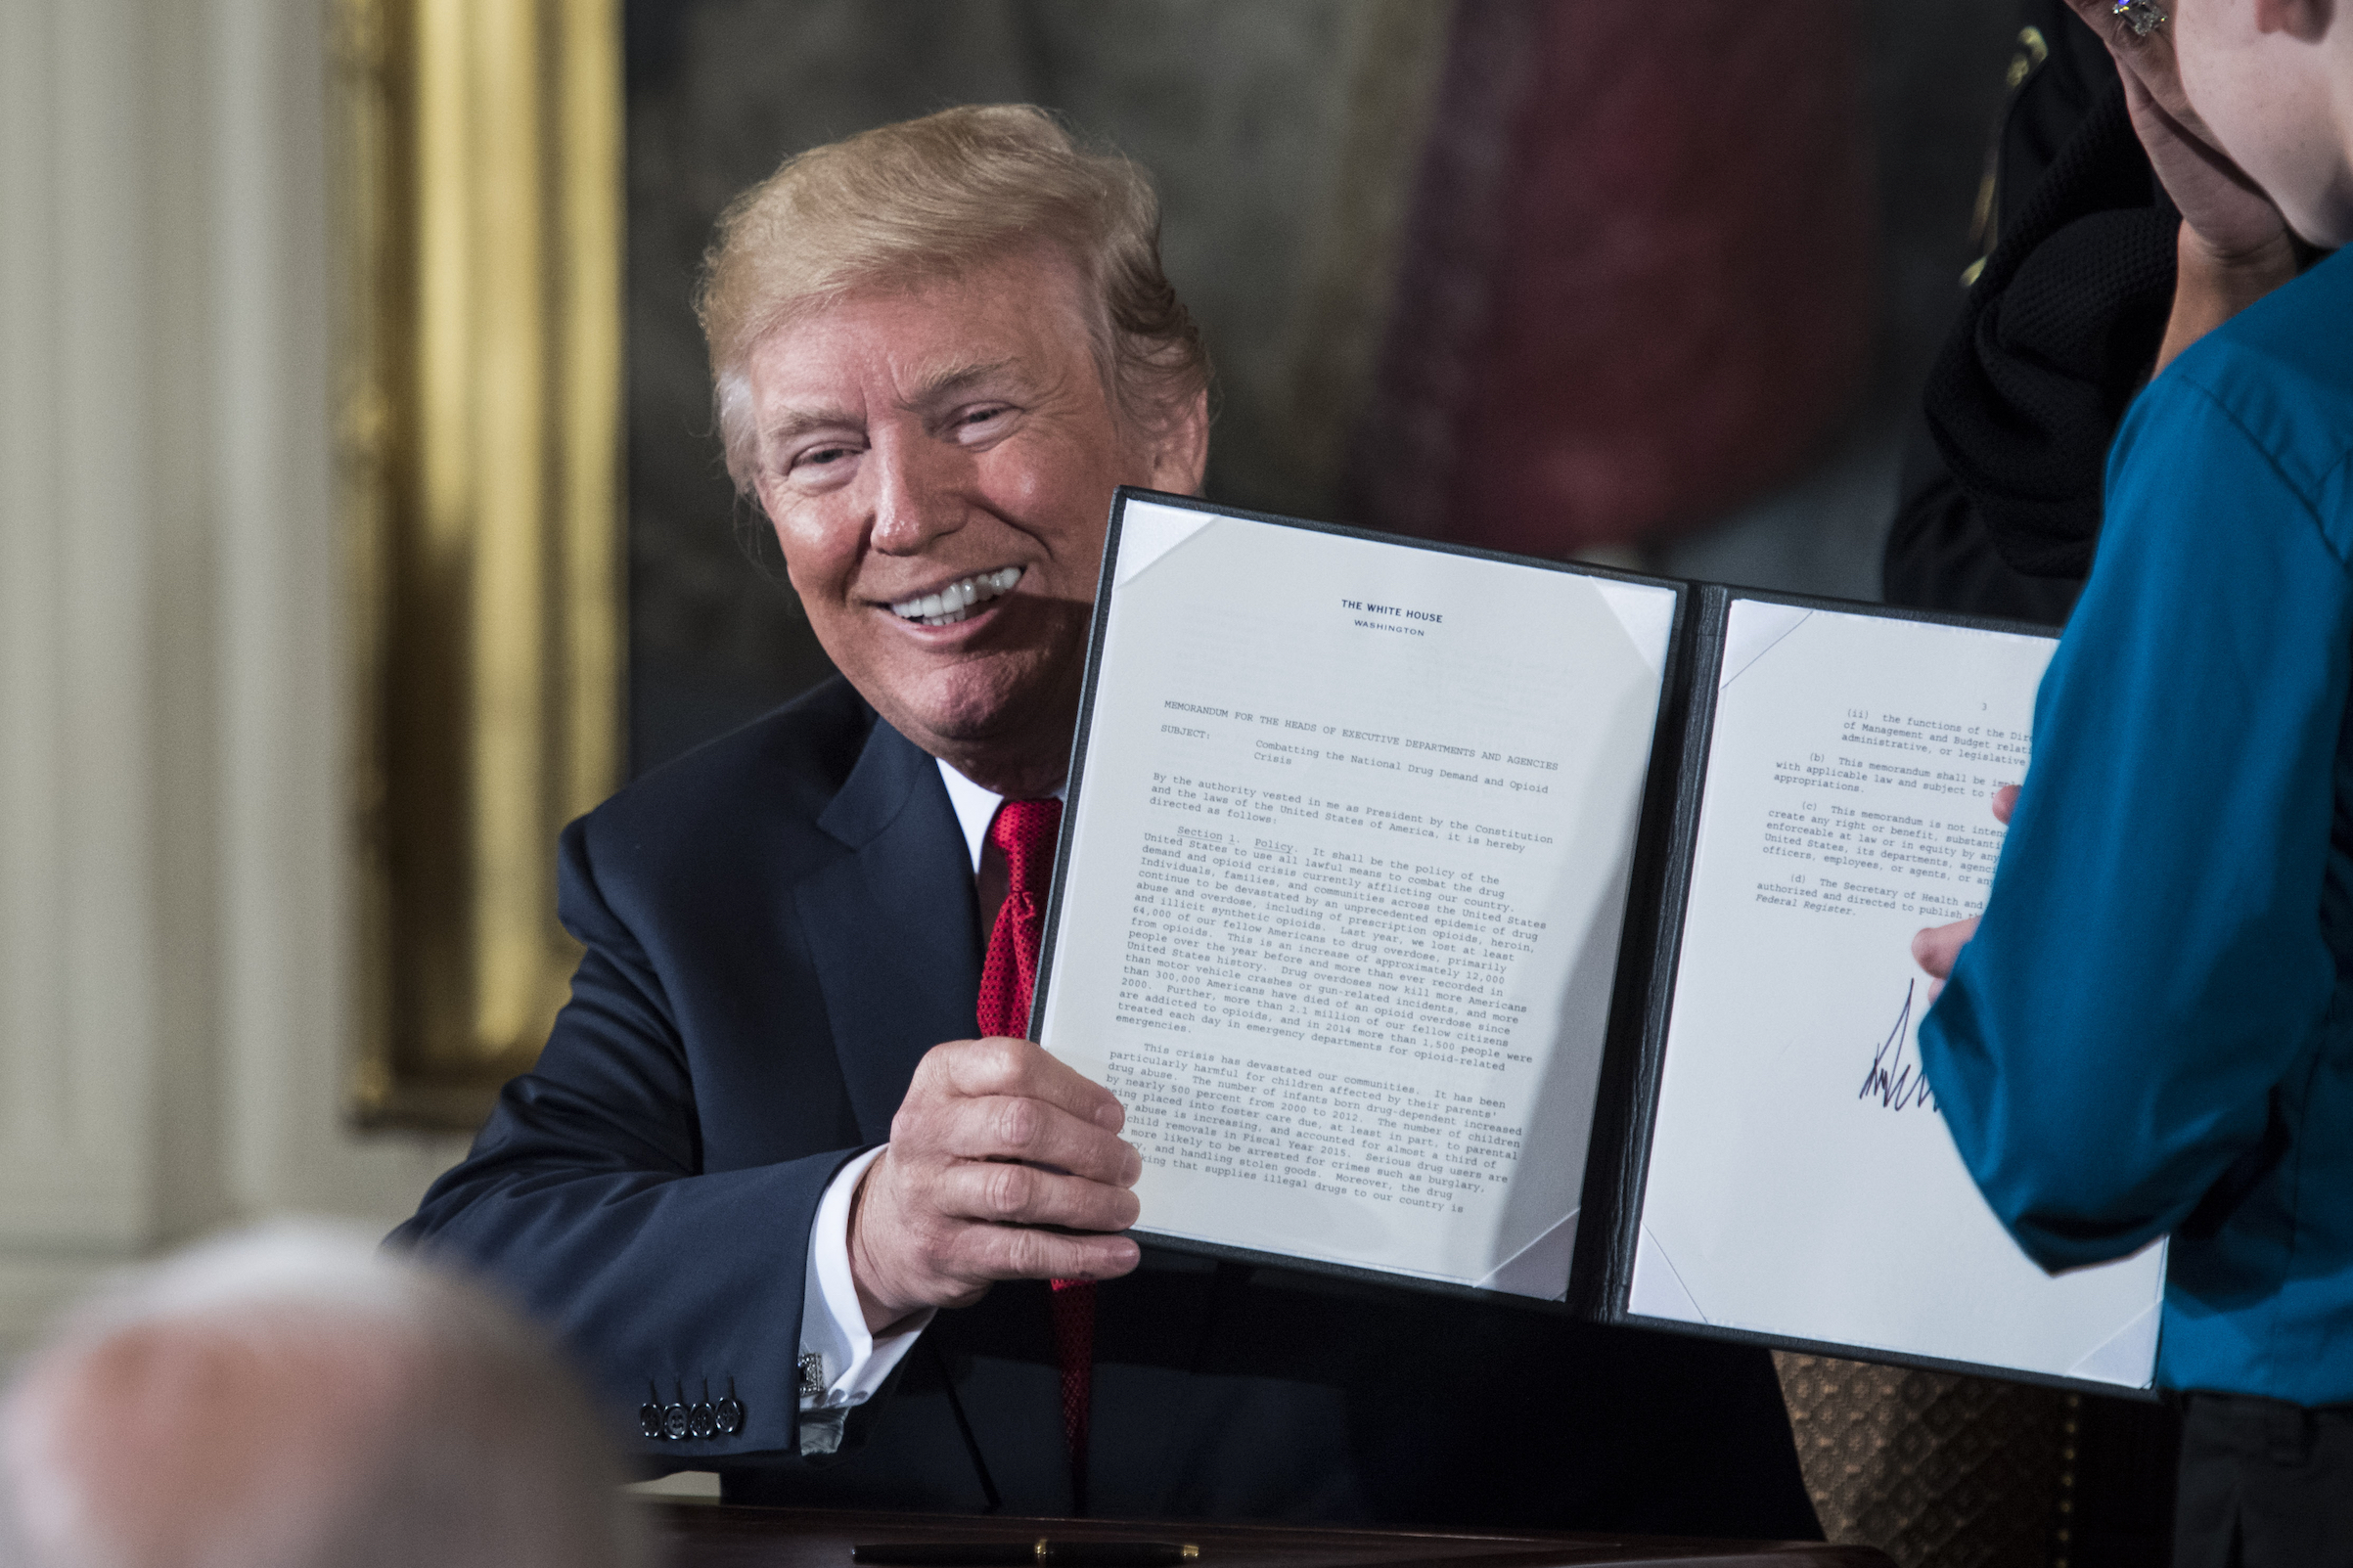 President Donald Trump signs a presidential memorandum to declare the opioid crisis a national public health emergency in the East Room of the White House in Washington, D.C., on Oct. 26, 2017. (Jabin Botsford&mdash;The Washington Post/Getty Images)